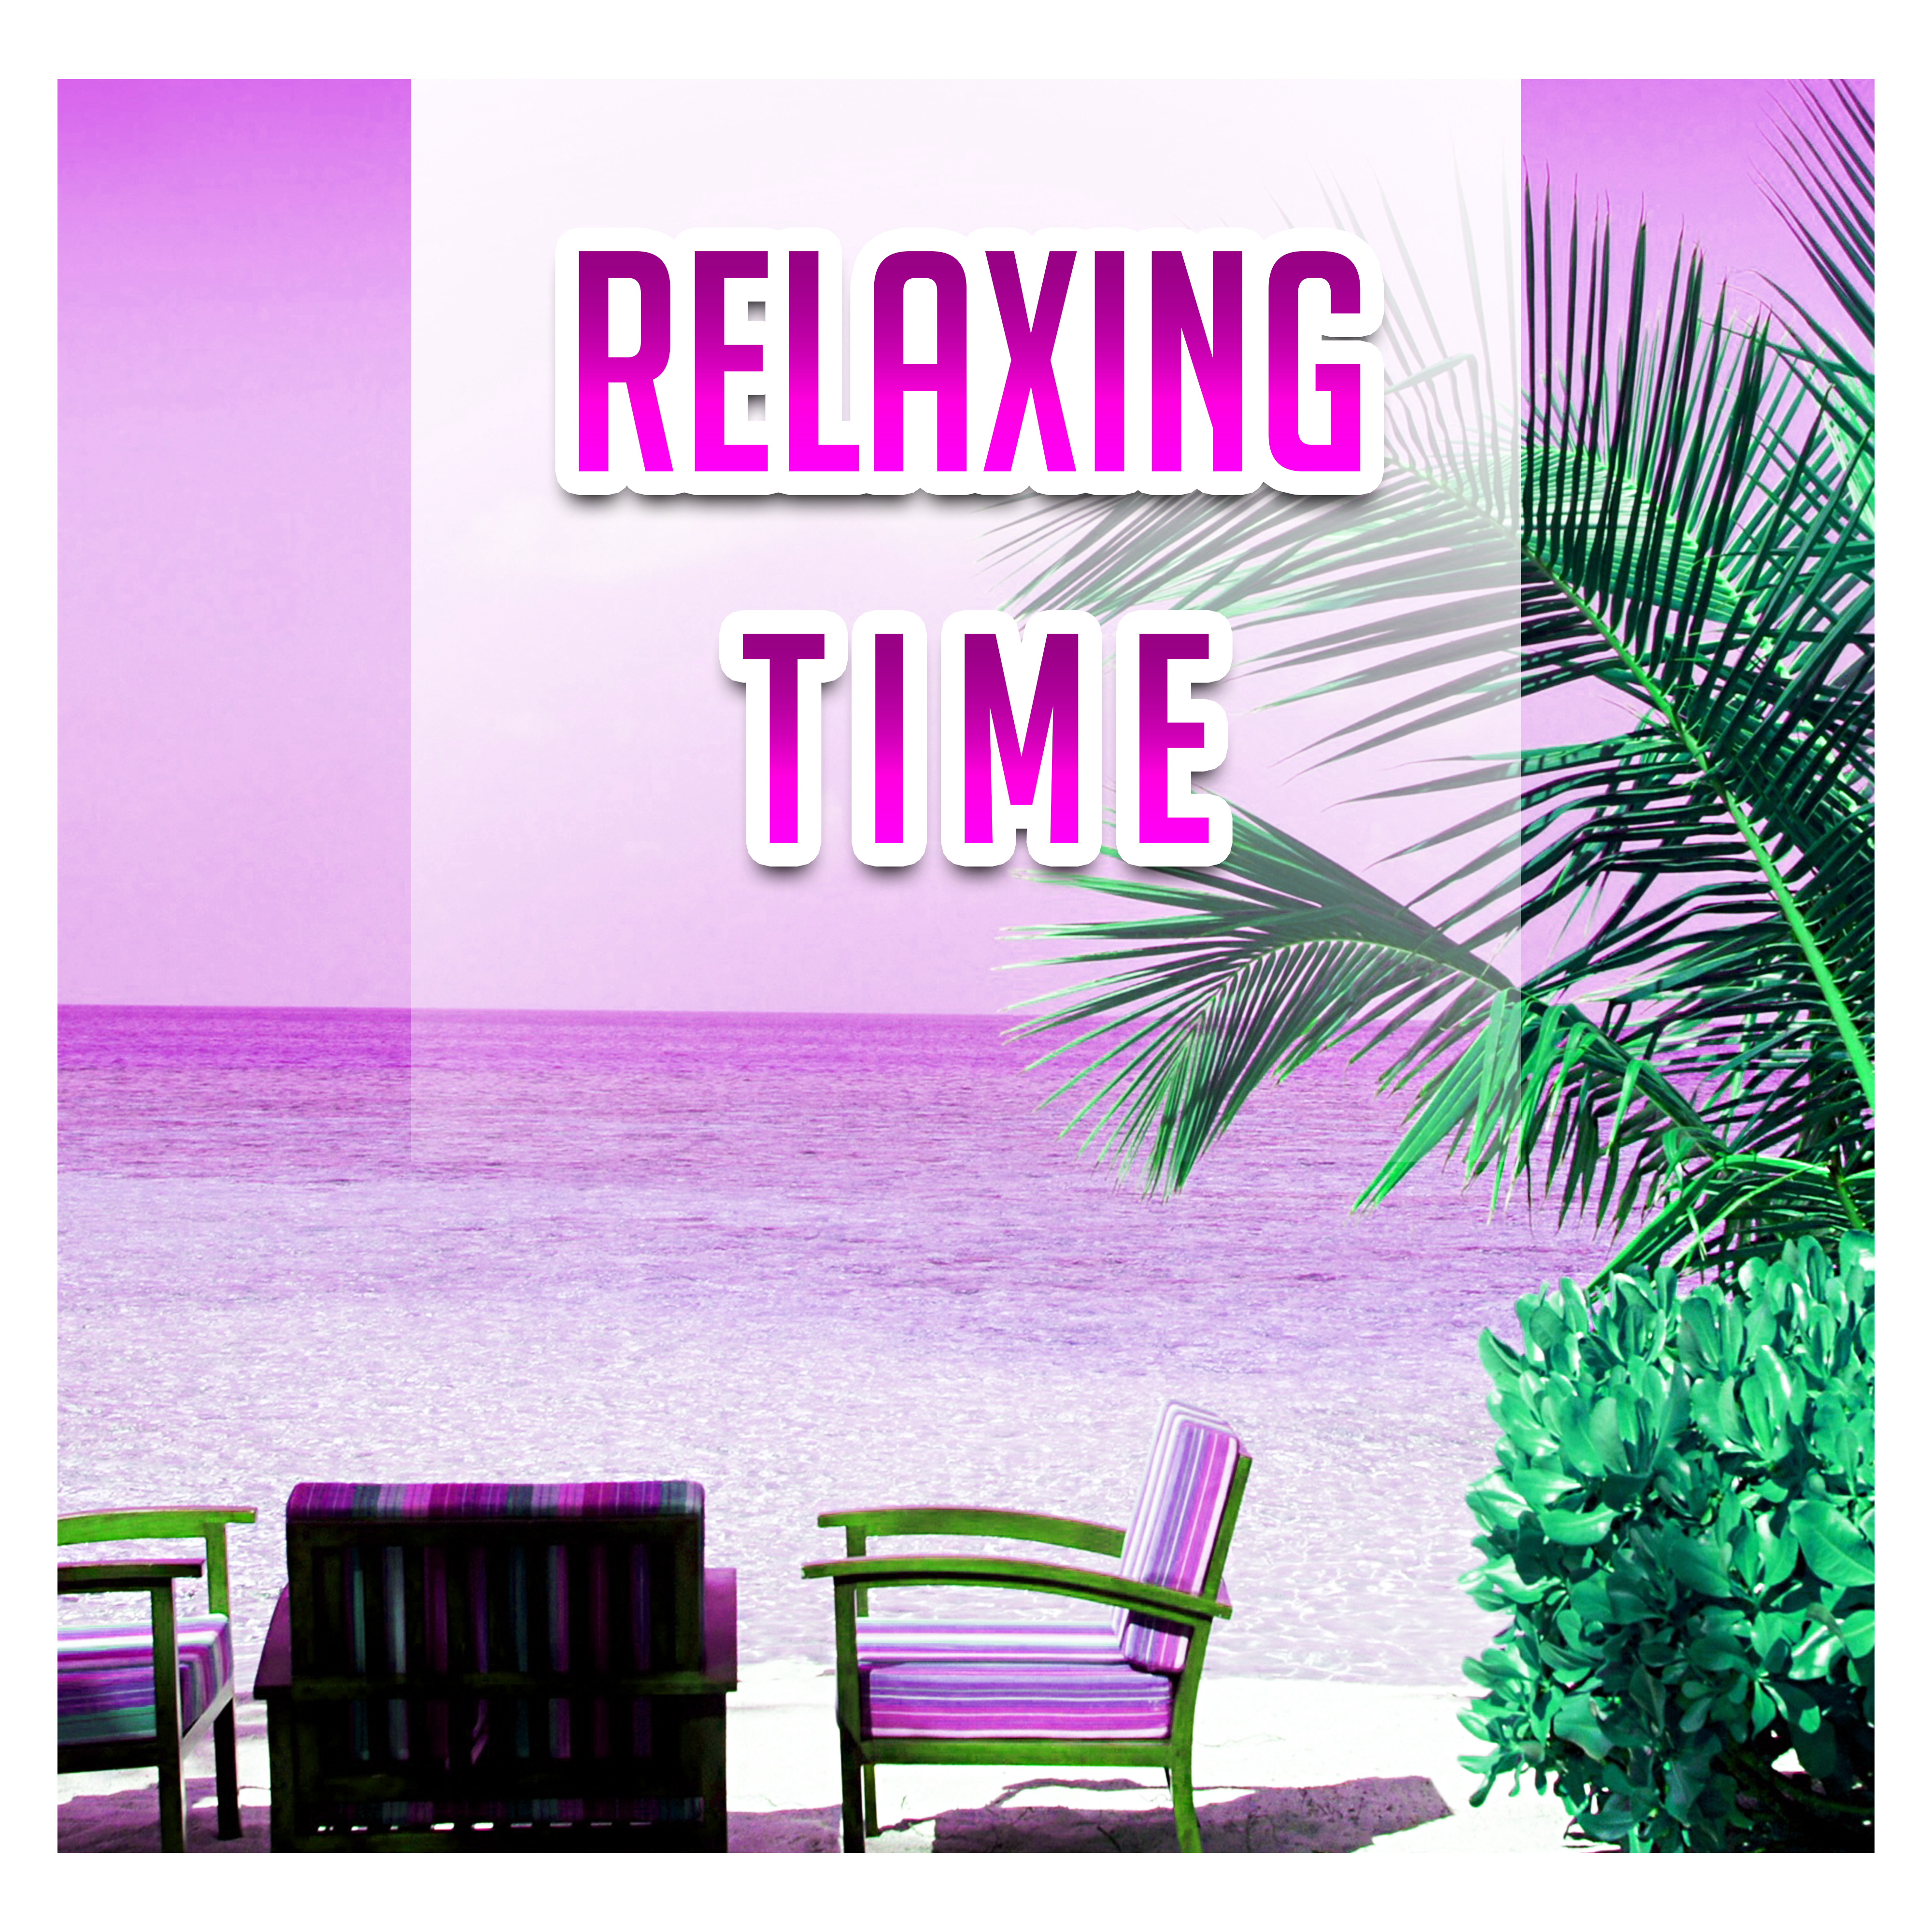 Relaxing Time – Holiday Chill Out Music, Pure Waves, Beach Chill, Ocean Dreams, Cocktail & Drinks Under Palms, Rest